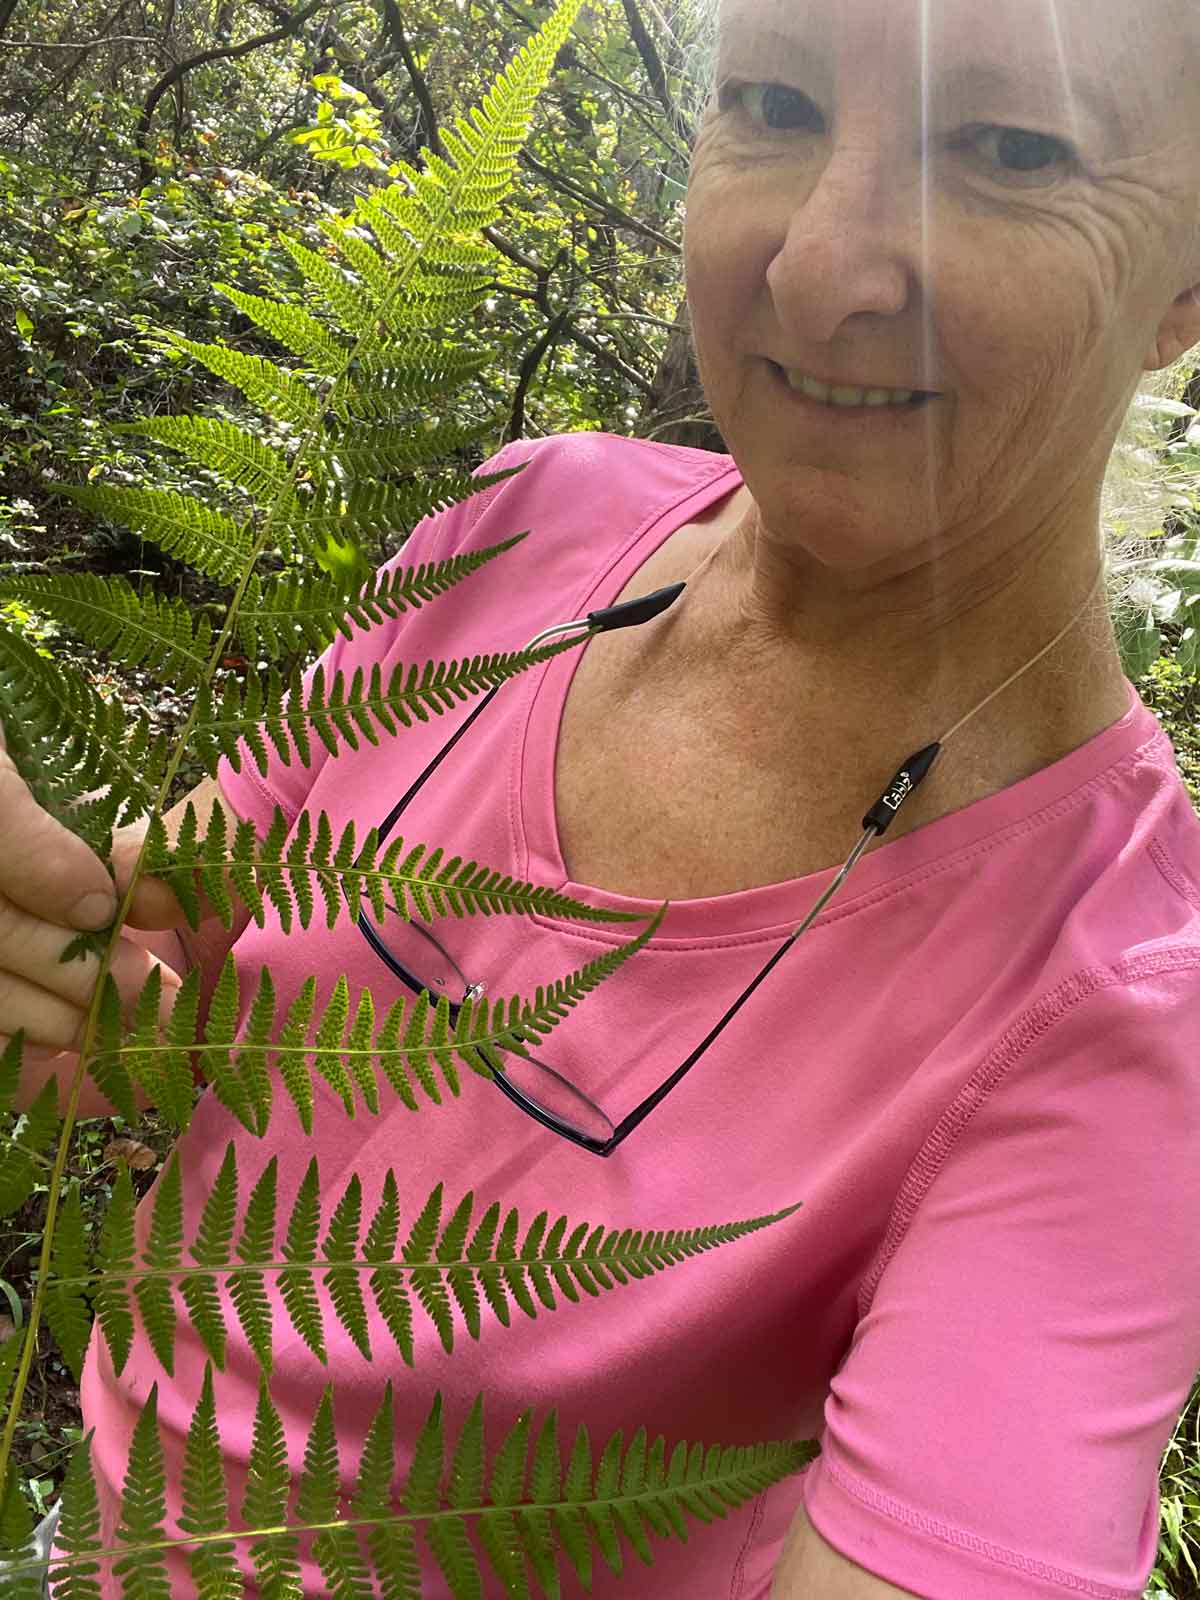 Madison Woods standing with a large frond.